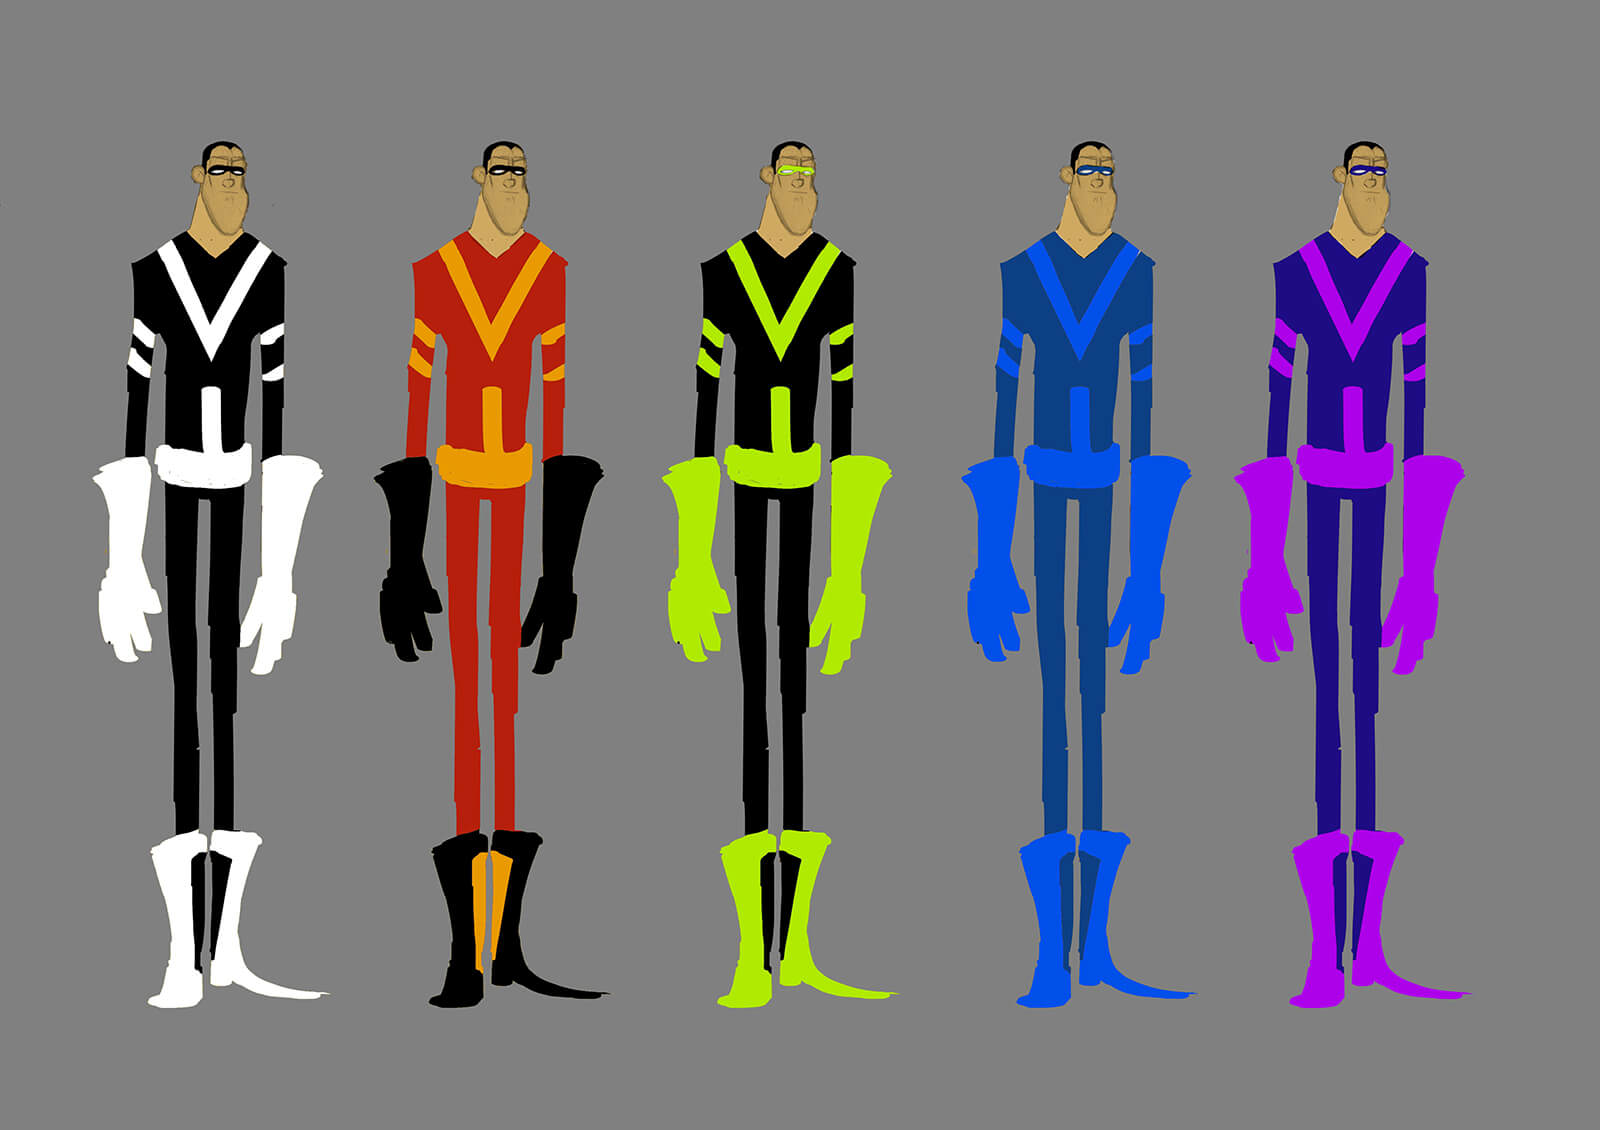 Color concept sketches or a tall, thin man in various futuristic outfits standing side to side